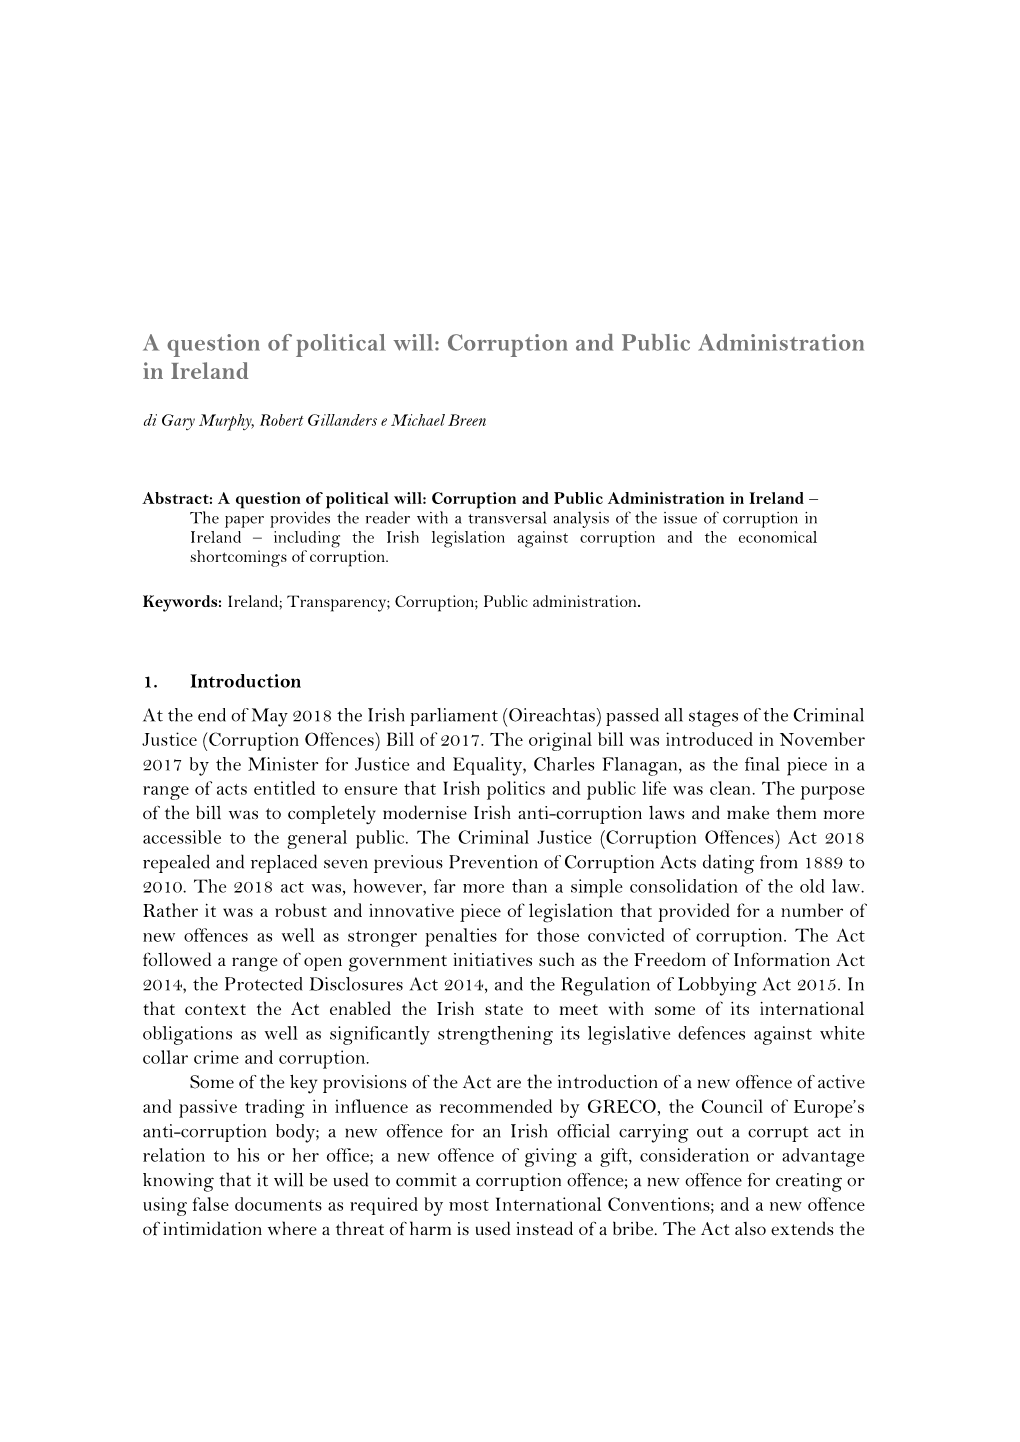 A Question of Political Will: Corruption and Public Administration in Ireland Di Gary Murphy, Robert Gillanders E Michael Breen